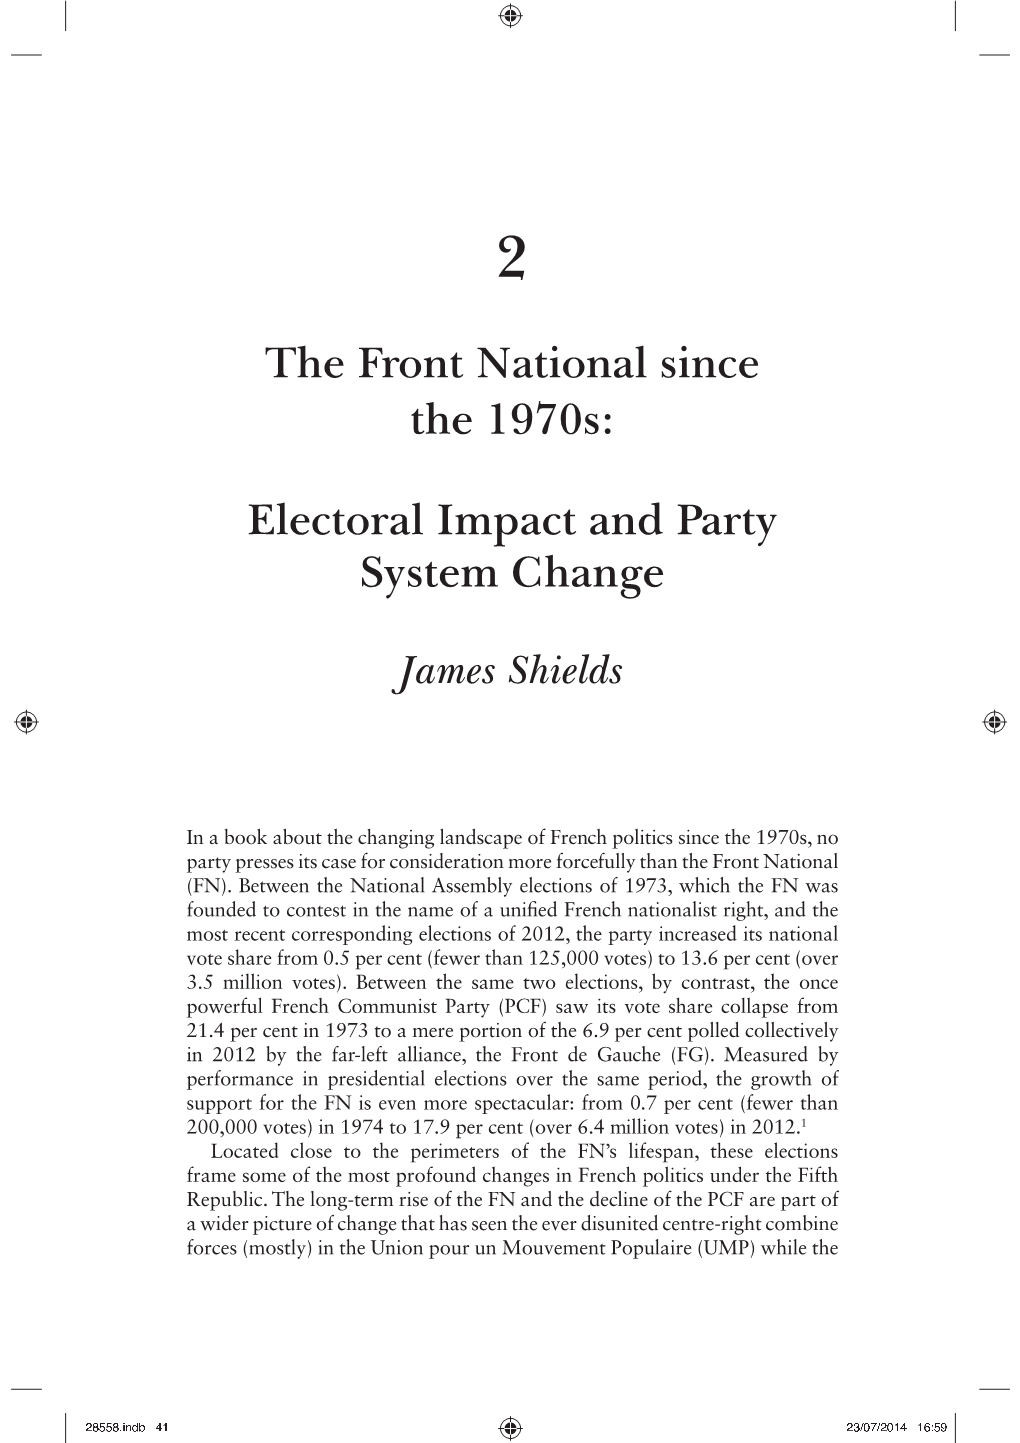 The Front National Since the 1970S: Electoral Impact and Party System